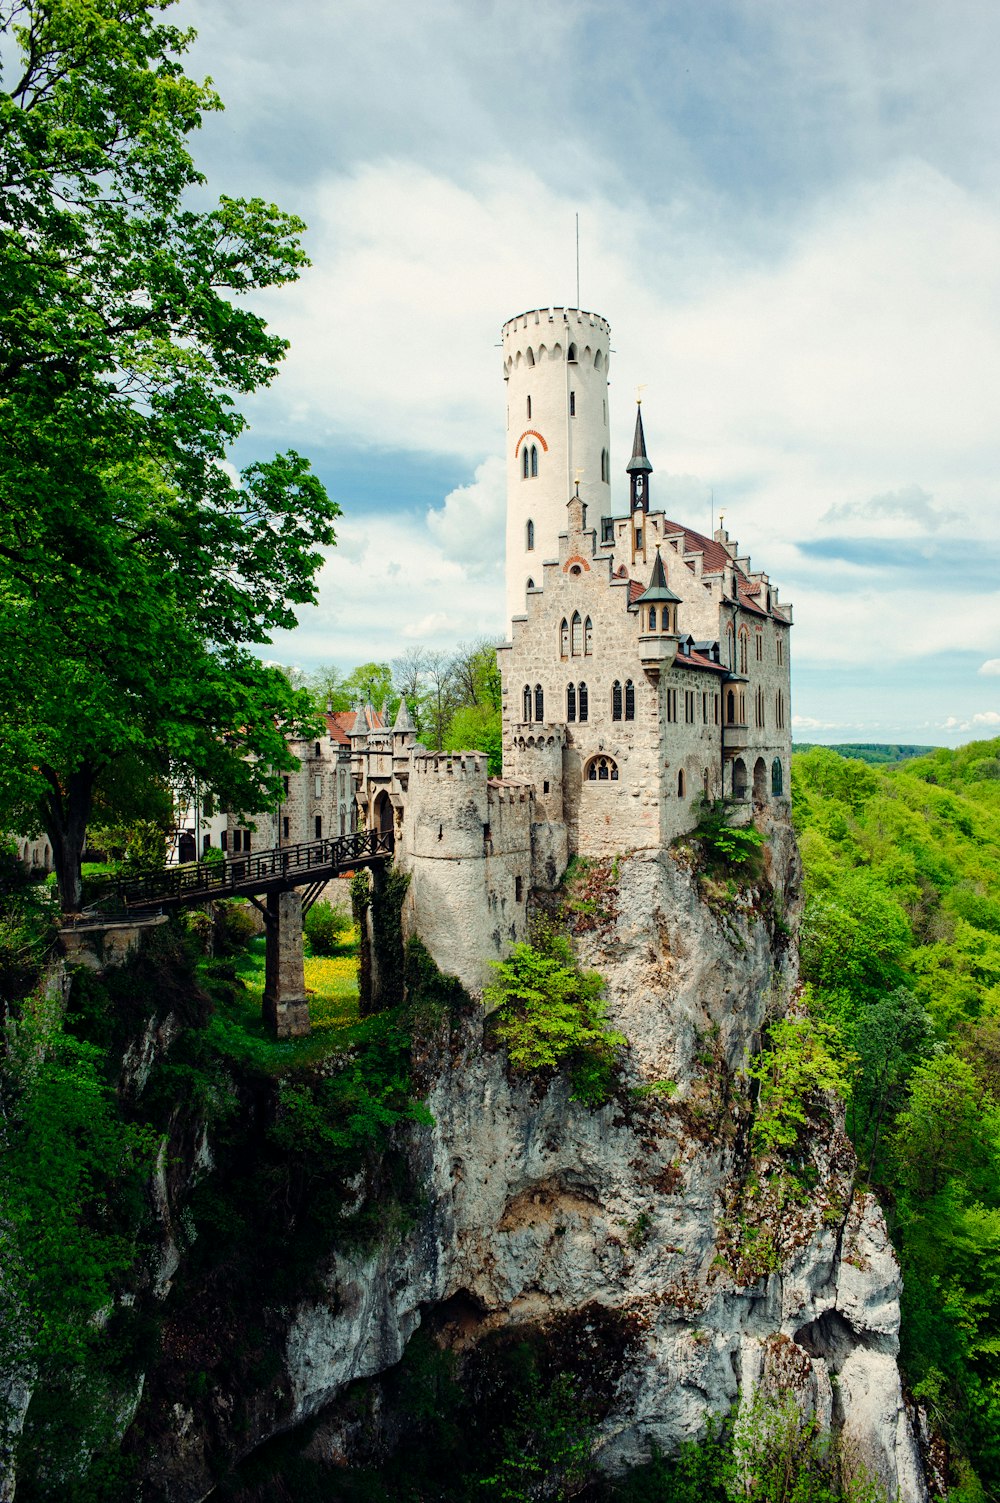 a castle on top of a cliff in the middle of a forest